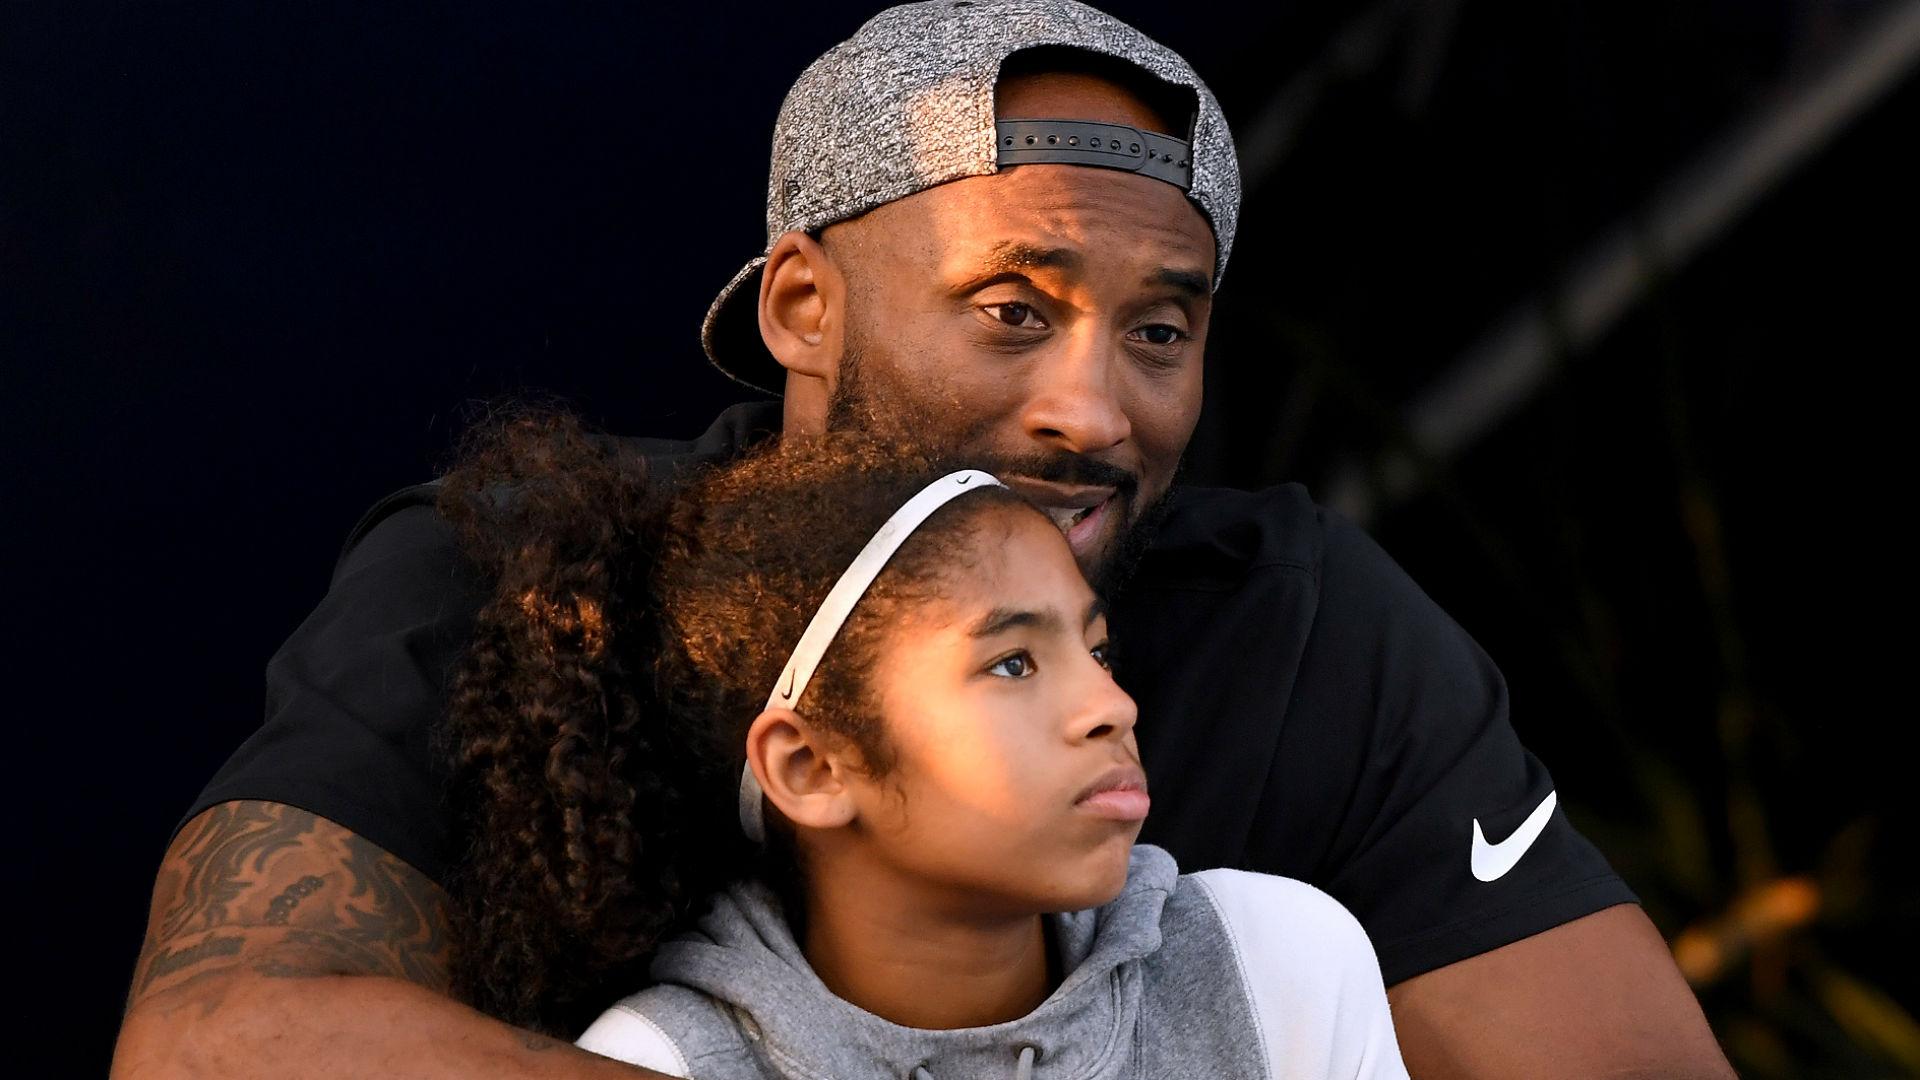 Kobe Bryant's daughter Gianna hoped to carry on NBA legend's